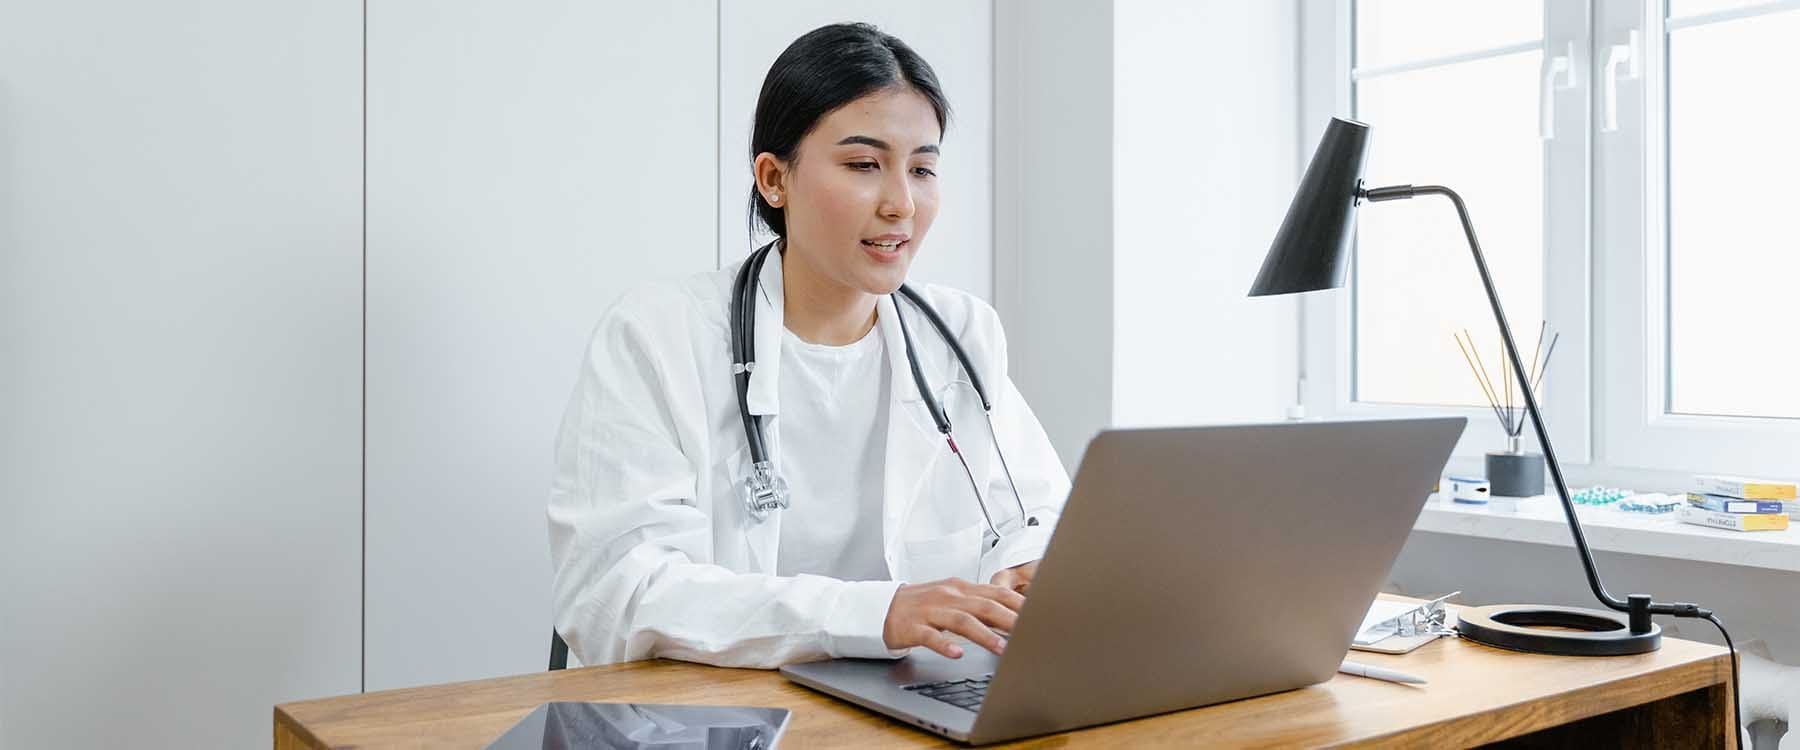 The rise in telemedicine offerings will have a lasting impact on Healthcare Planning and Design.